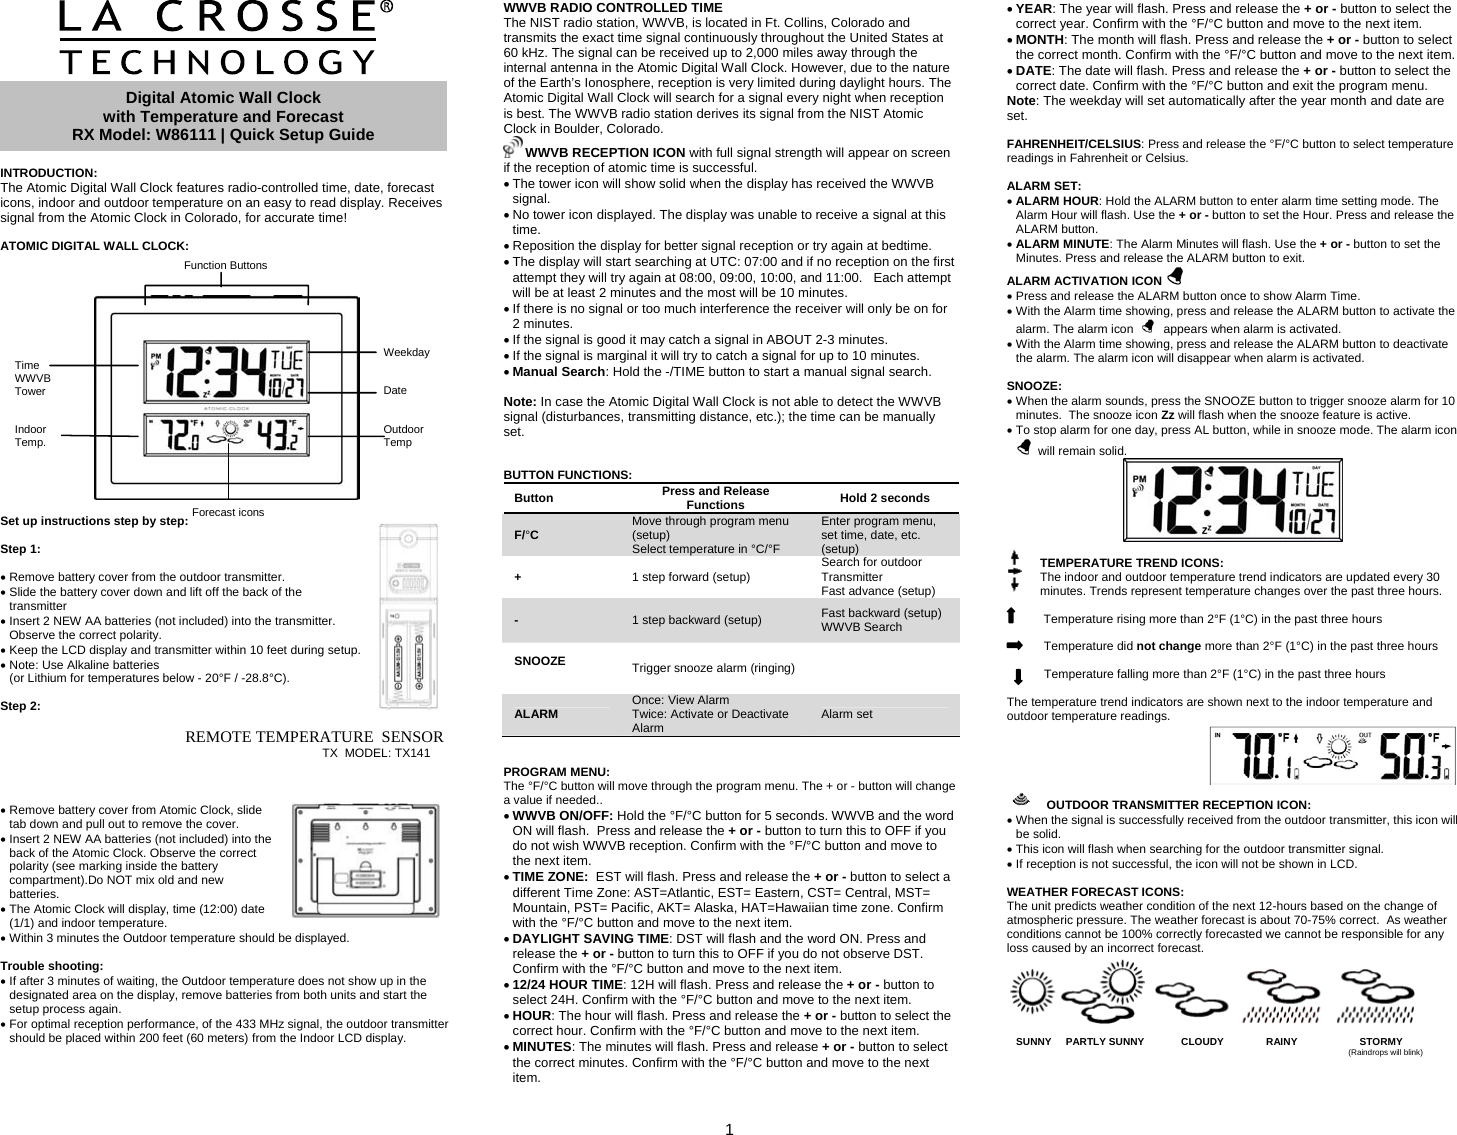  1       INTRODUCTION: The Atomic Digital Wall Clock features radio-controlled time, date, forecast icons, indoor and outdoor temperature on an easy to read display. Receives signal from the Atomic Clock in Colorado, for accurate time!  ATOMIC DIGITAL WALL CLOCK:      Set up instructions step by step:   Step 1:  • Remove battery cover from the outdoor transmitter. • Slide the battery cover down and lift off the back of the transmitter • Insert 2 NEW AA batteries (not included) into the transmitter. Observe the correct polarity. • Keep the LCD display and transmitter within 10 feet during setup. • Note: Use Alkaline batteries  (or Lithium for temperatures below - 20°F / -28.8°C).  Step 2:                                                  REMOTE TEMPERATURE  SENSOR                                                                                TX  MODEL: TX141    • Remove battery cover from Atomic Clock, slide tab down and pull out to remove the cover.  • Insert 2 NEW AA batteries (not included) into the back of the Atomic Clock. Observe the correct polarity (see marking inside the battery compartment).Do NOT mix old and new batteries.  • The Atomic Clock will display, time (12:00) date (1/1) and indoor temperature. • Within 3 minutes the Outdoor temperature should be displayed.  Trouble shooting: • If after 3 minutes of waiting, the Outdoor temperature does not show up in the designated area on the display, remove batteries from both units and start the setup process again. • For optimal reception performance, of the 433 MHz signal, the outdoor transmitter should be placed within 200 feet (60 meters) from the Indoor LCD display.    WWVB RADIO CONTROLLED TIME The NIST radio station, WWVB, is located in Ft. Collins, Colorado and transmits the exact time signal continuously throughout the United States at 60 kHz. The signal can be received up to 2,000 miles away through the internal antenna in the Atomic Digital Wall Clock. However, due to the nature of the Earth’s Ionosphere, reception is very limited during daylight hours. The Atomic Digital Wall Clock will search for a signal every night when reception is best. The WWVB radio station derives its signal from the NIST Atomic Clock in Boulder, Colorado.   WWVB RECEPTION ICON with full signal strength will appear on screen if the reception of atomic time is successful.  • The tower icon will show solid when the display has received the WWVB signal. • No tower icon displayed. The display was unable to receive a signal at this time. • Reposition the display for better signal reception or try again at bedtime. • The display will start searching at UTC: 07:00 and if no reception on the first attempt they will try again at 08:00, 09:00, 10:00, and 11:00.   Each attempt will be at least 2 minutes and the most will be 10 minutes.  • If there is no signal or too much interference the receiver will only be on for 2 minutes. • If the signal is good it may catch a signal in ABOUT 2-3 minutes.   • If the signal is marginal it will try to catch a signal for up to 10 minutes.  • Manual Search: Hold the -/TIME button to start a manual signal search.  Note: In case the Atomic Digital Wall Clock is not able to detect the WWVB signal (disturbances, transmitting distance, etc.); the time can be manually set.   BUTTON FUNCTIONS: Button  Press and Release Functions  Hold 2 seconds F/°C  Move through program menu (setup)                                    Select temperature in °C/°F         Enter program menu, set time, date, etc. (setup) +  1 step forward (setup)  Search for outdoor Transmitter             Fast advance (setup) -  1 step backward (setup)  Fast backward (setup)      WWVB Search SNOOZE   Trigger snooze alarm (ringing)      ALARM  Once: View Alarm                      Twice: Activate or Deactivate Alarm                                         Alarm set   PROGRAM MENU:  The °F/°C button will move through the program menu. The + or - button will change a value if needed.. • WWVB ON/OFF: Hold the °F/°C button for 5 seconds. WWVB and the word ON will flash.  Press and release the + or - button to turn this to OFF if you do not wish WWVB reception. Confirm with the °F/°C button and move to the next item. • TIME ZONE:  EST will flash. Press and release the + or - button to select a different Time Zone: AST=Atlantic, EST= Eastern, CST= Central, MST= Mountain, PST= Pacific, AKT= Alaska, HAT=Hawaiian time zone. Confirm with the °F/°C button and move to the next item. • DAYLIGHT SAVING TIME: DST will flash and the word ON. Press and release the + or - button to turn this to OFF if you do not observe DST. Confirm with the °F/°C button and move to the next item. • 12/24 HOUR TIME: 12H will flash. Press and release the + or - button to select 24H. Confirm with the °F/°C button and move to the next item. • HOUR: The hour will flash. Press and release the + or - button to select the correct hour. Confirm with the °F/°C button and move to the next item. • MINUTES: The minutes will flash. Press and release + or - button to select the correct minutes. Confirm with the °F/°C button and move to the next item. • YEAR: The year will flash. Press and release the + or - button to select the correct year. Confirm with the °F/°C button and move to the next item. • MONTH: The month will flash. Press and release the + or - button to select the correct month. Confirm with the °F/°C button and move to the next item. • DATE: The date will flash. Press and release the + or - button to select the correct date. Confirm with the °F/°C button and exit the program menu. Note: The weekday will set automatically after the year month and date are set.  FAHRENHEIT/CELSIUS: Press and release the °F/°C button to select temperature readings in Fahrenheit or Celsius.                     ALARM SET:  • ALARM HOUR: Hold the ALARM button to enter alarm time setting mode. The Alarm Hour will flash. Use the + or - button to set the Hour. Press and release the ALARM button.  • ALARM MINUTE: The Alarm Minutes will flash. Use the + or - button to set the Minutes. Press and release the ALARM button to exit. ALARM ACTIVATION ICON   • Press and release the ALARM button once to show Alarm Time.  • With the Alarm time showing, press and release the ALARM button to activate the alarm. The alarm icon     appears when alarm is activated.  • With the Alarm time showing, press and release the ALARM button to deactivate the alarm. The alarm icon will disappear when alarm is activated.   SNOOZE:   • When the alarm sounds, press the SNOOZE button to trigger snooze alarm for 10 minutes.  The snooze icon Zz will flash when the snooze feature is active. • To stop alarm for one day, press AL button, while in snooze mode. The alarm icon  will remain solid.   TEMPERATURE TREND ICONS:     The indoor and outdoor temperature trend indicators are updated every 30 minutes. Trends represent temperature changes over the past three hours.     Temperature rising more than 2°F (1°C) in the past three hours   Temperature did not change more than 2°F (1°C) in the past three hours    Temperature falling more than 2°F (1°C) in the past three hours  The temperature trend indicators are shown next to the indoor temperature and outdoor temperature readings.   OUTDOOR TRANSMITTER RECEPTION ICON: • When the signal is successfully received from the outdoor transmitter, this icon will be solid.  • This icon will flash when searching for the outdoor transmitter signal. • If reception is not successful, the icon will not be shown in LCD.  WEATHER FORECAST ICONS: The unit predicts weather condition of the next 12-hours based on the change of atmospheric pressure. The weather forecast is about 70-75% correct.  As weather conditions cannot be 100% correctly forecasted we cannot be responsible for any loss caused by an incorrect forecast.     Digital Atomic Wall Clock  with Temperature and Forecast RX Model: W86111 | Quick Setup GuideFunction Buttons Time WWVB Tower   Indoor Temp. Weekday   Date   Outdoor Temp Forecast icons SUNNY     PARTLY SUNNY             CLOUDY               RAINY                      STORMY                                                                                                                       (Raindrops will blink)      